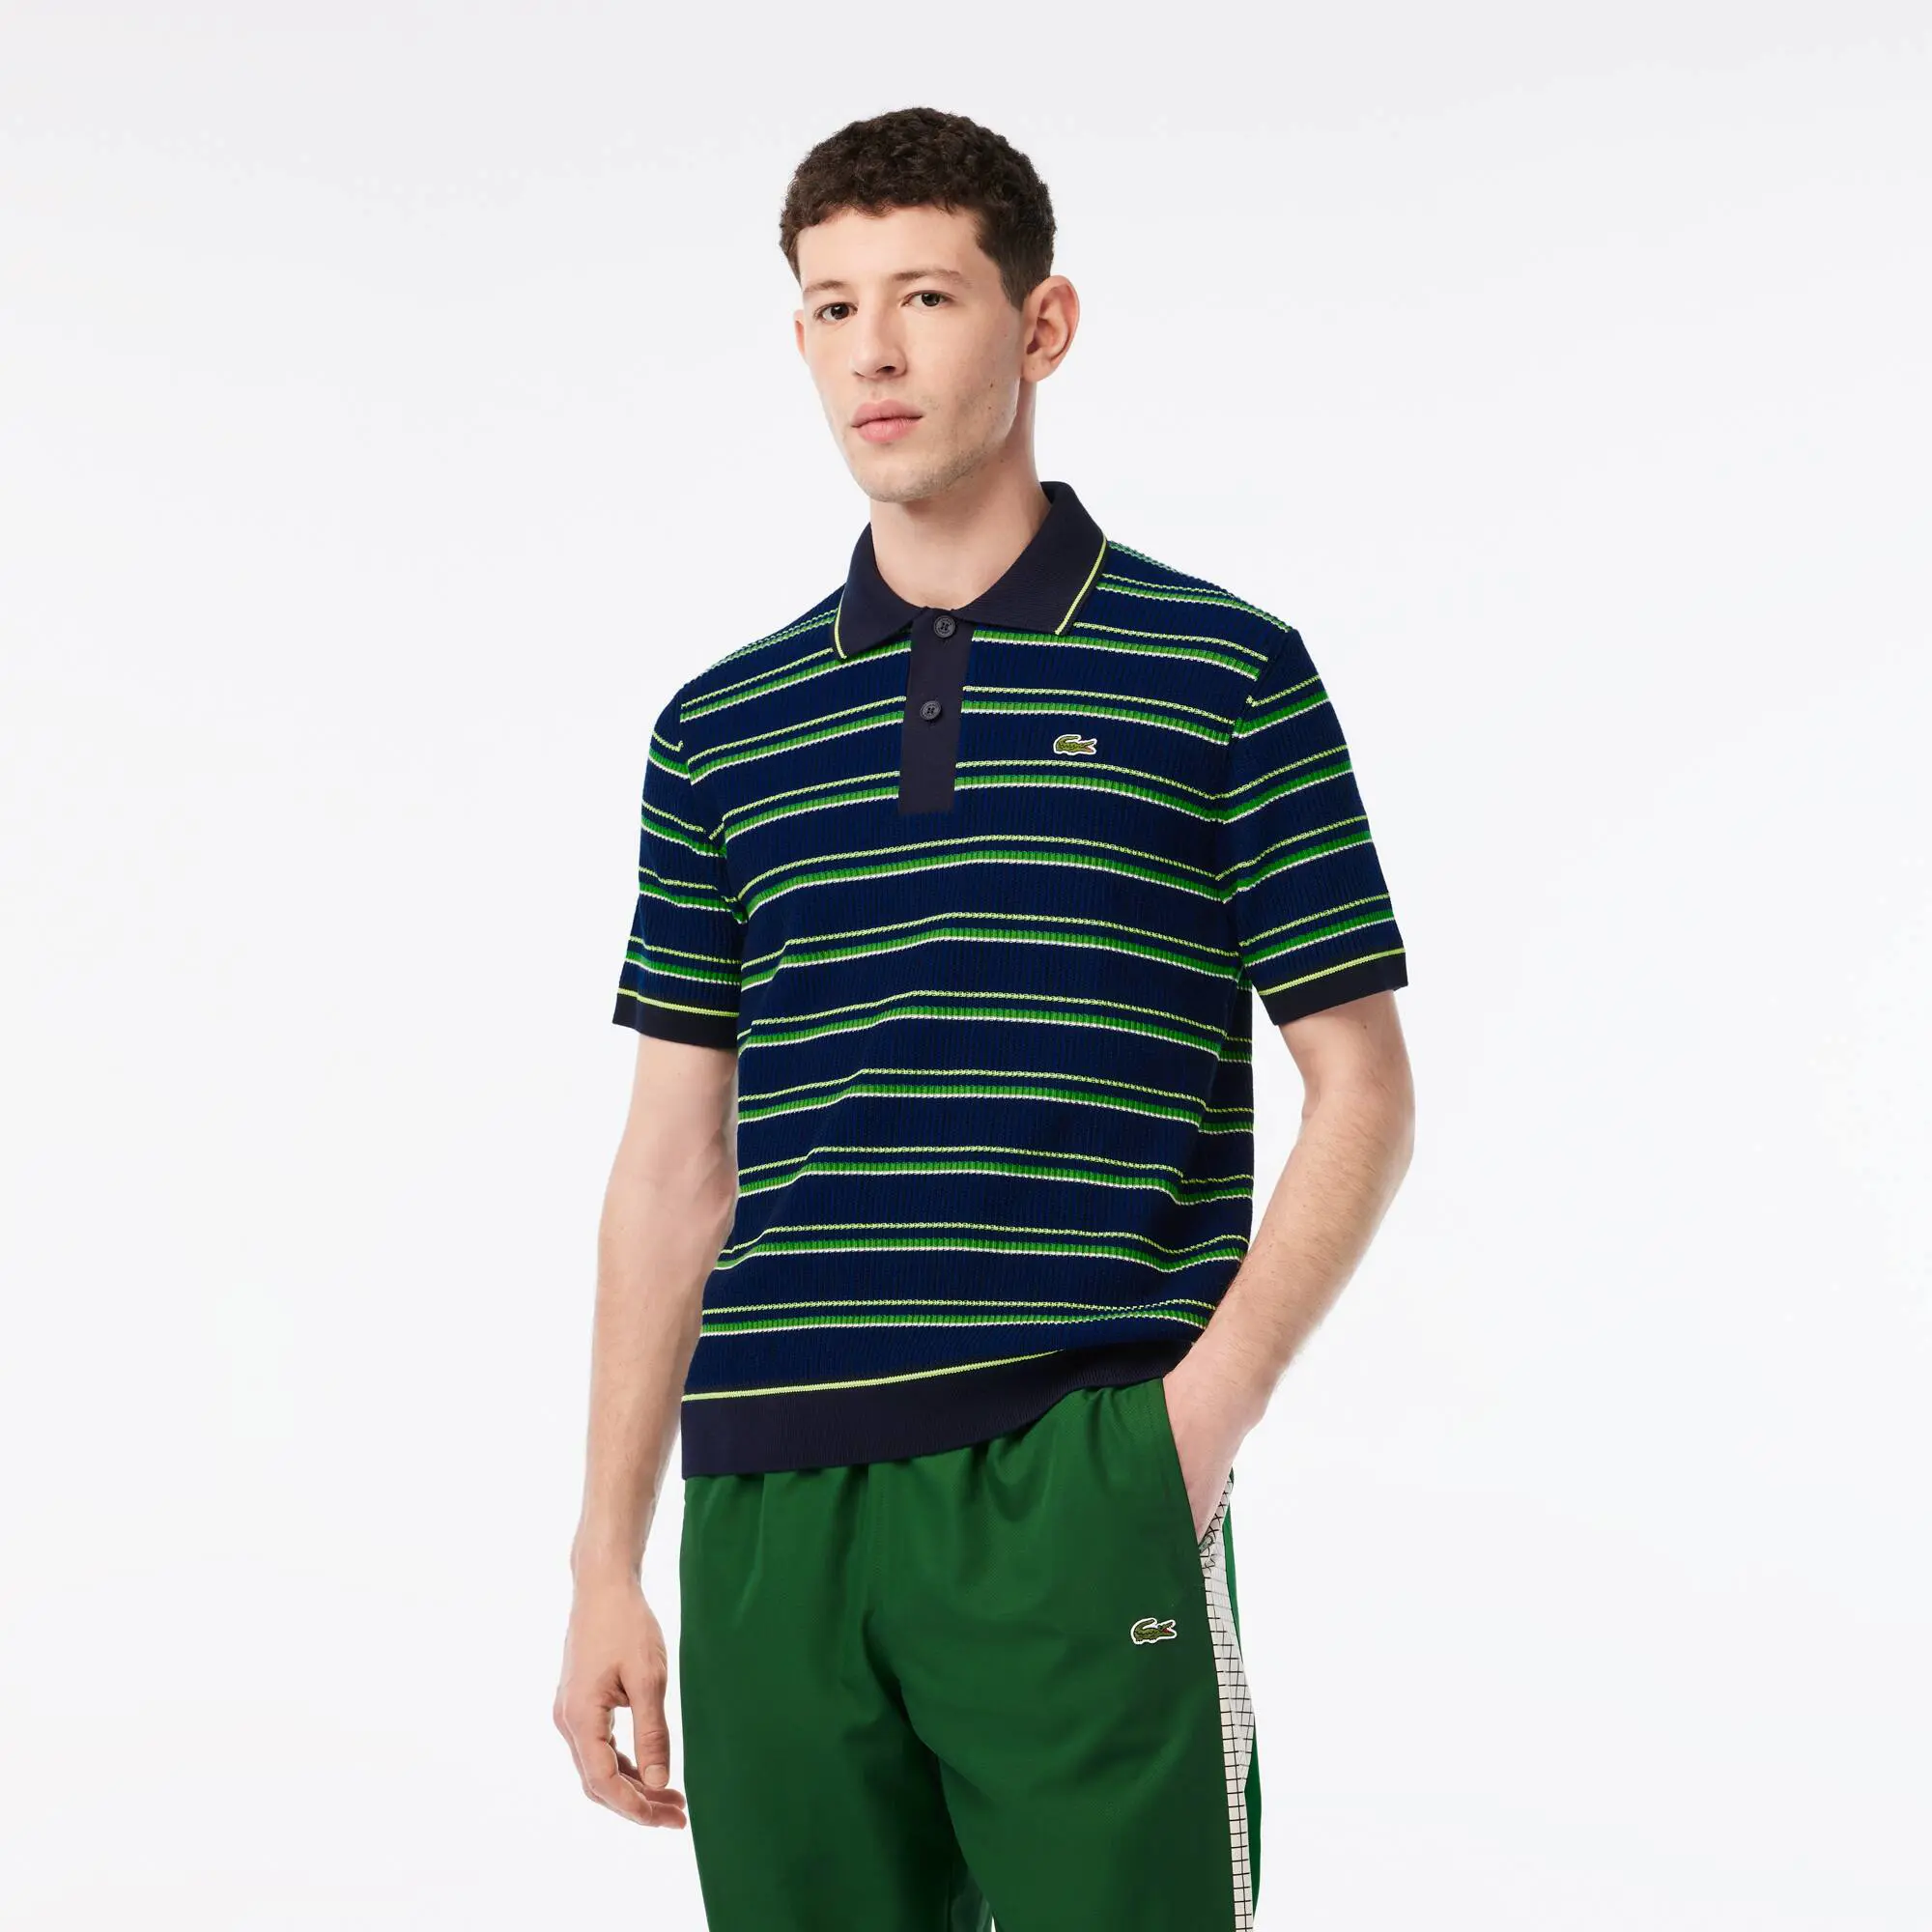 Lacoste Men’s Lacoste Organic Cotton French Made Striped Polo Shirt. 1